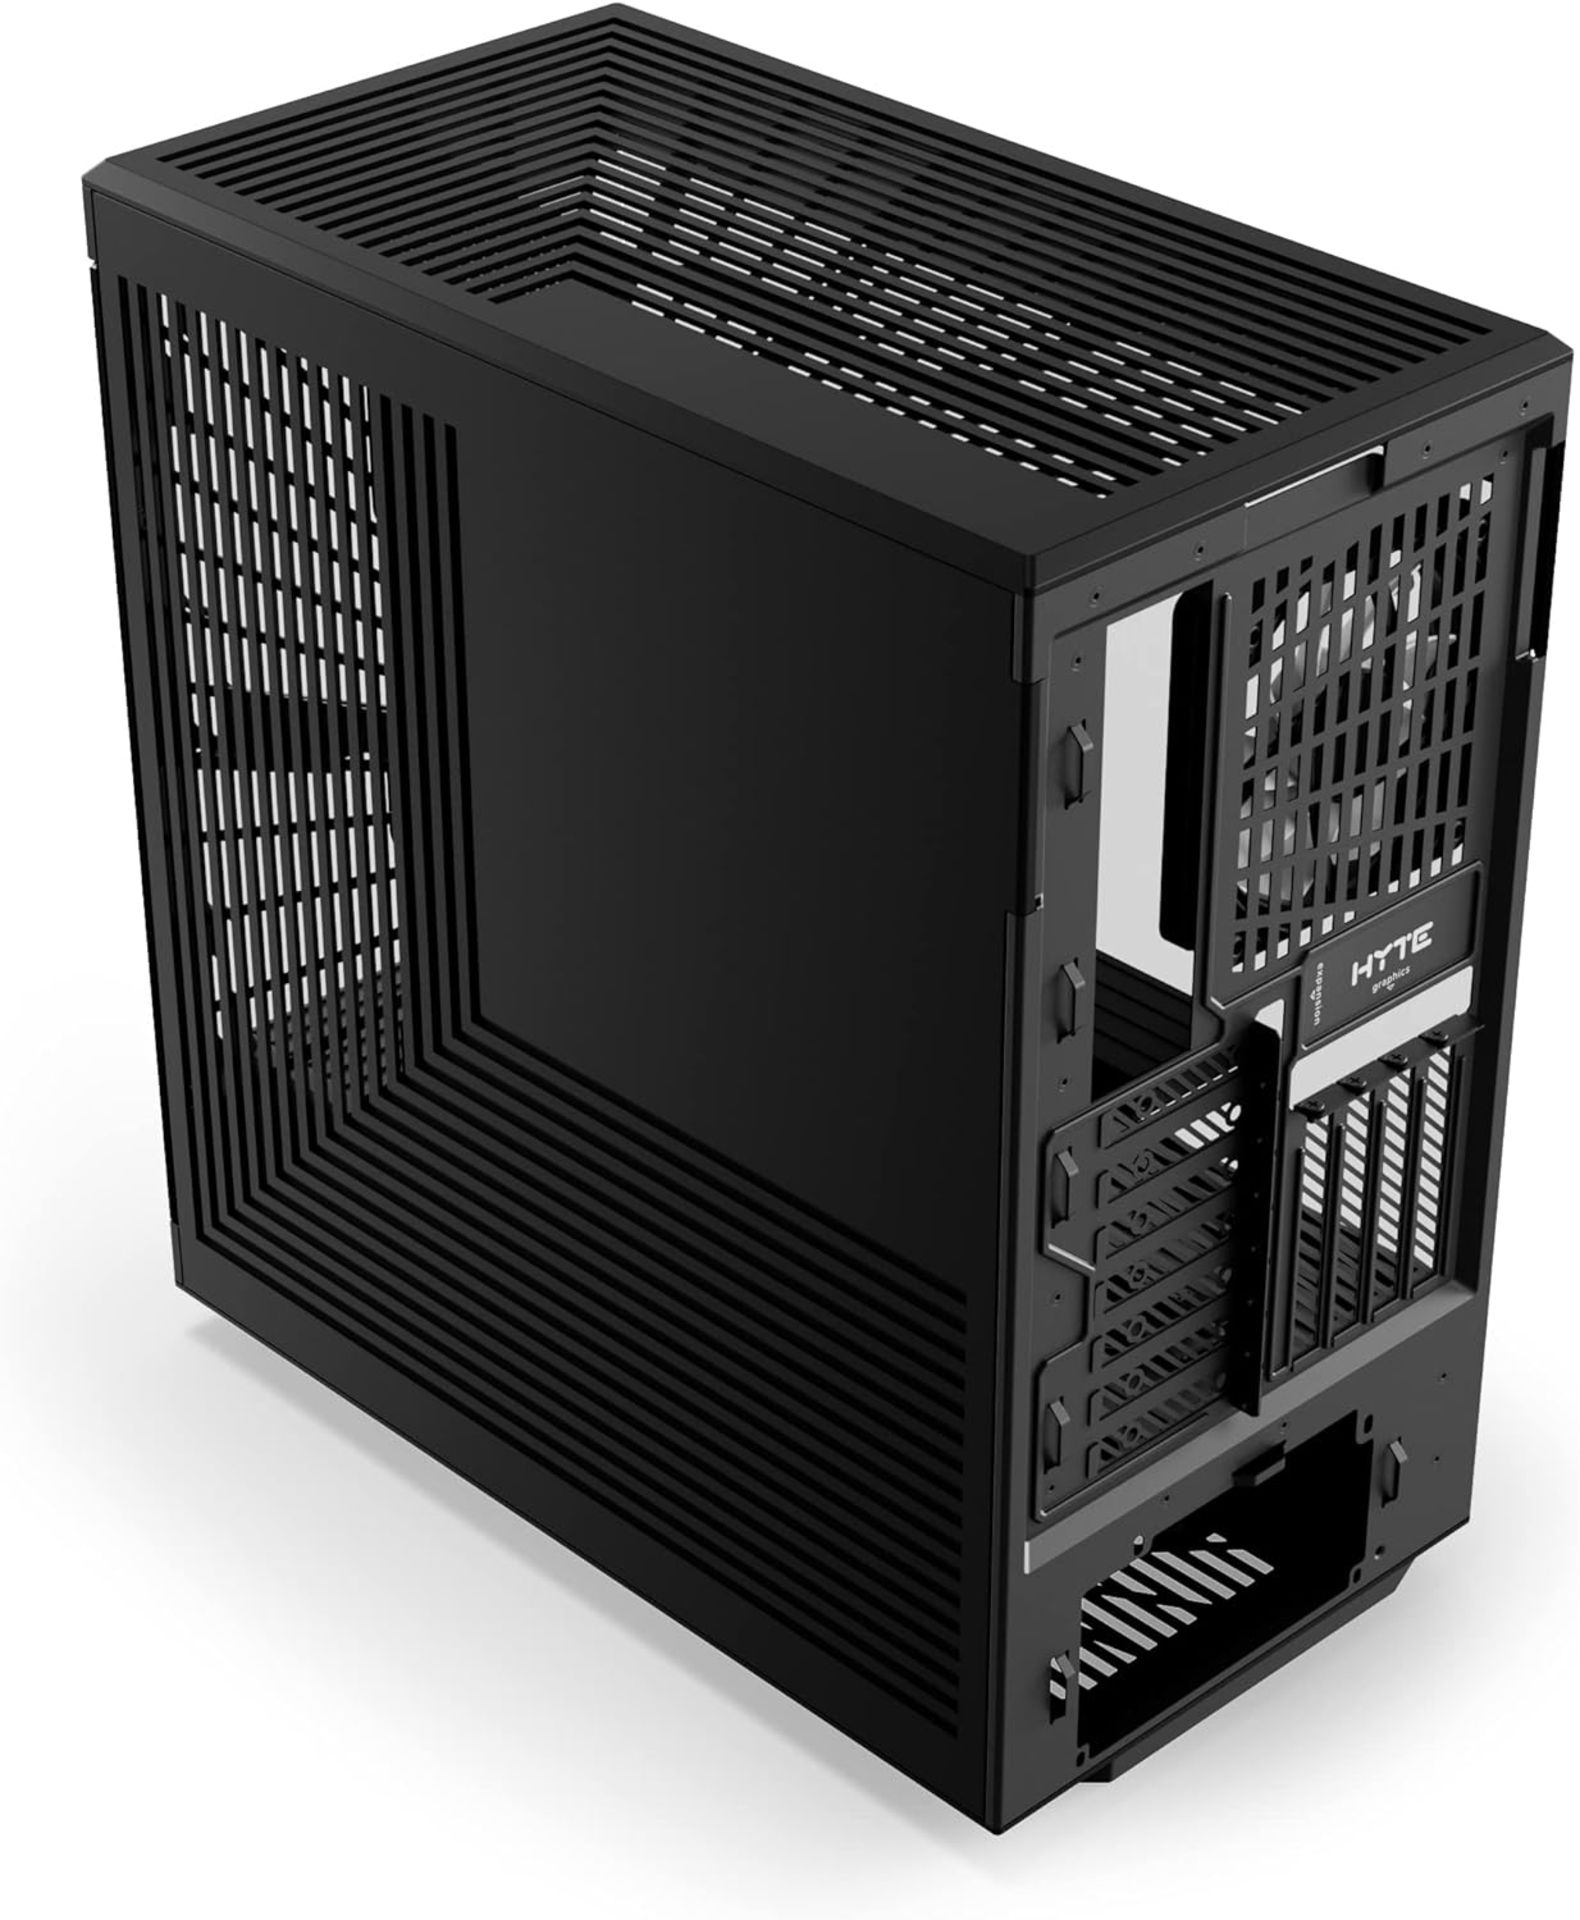 NEW & BOXED HYTE Y40 Mid-Tower ATX Case - Black. RRP £159.98. (R15R). The HYTE Y40 Mid-Tower ATX - Image 4 of 6